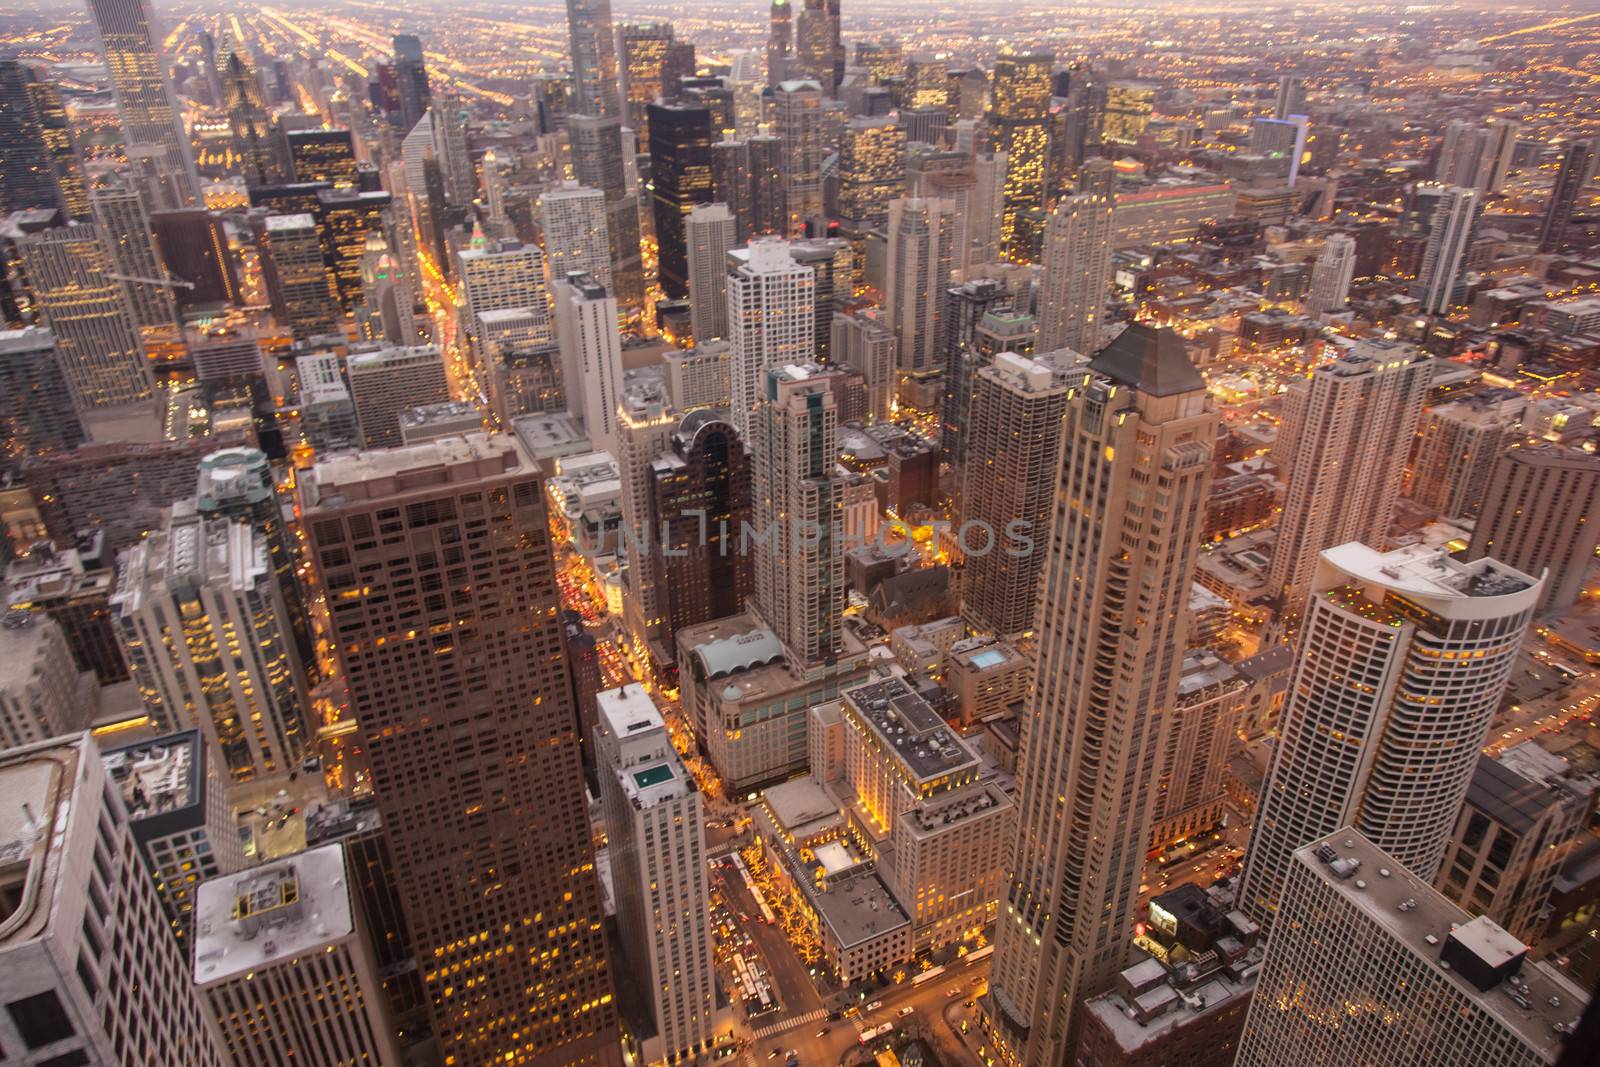 Chicago skyline from the hancock tower by melastmohican